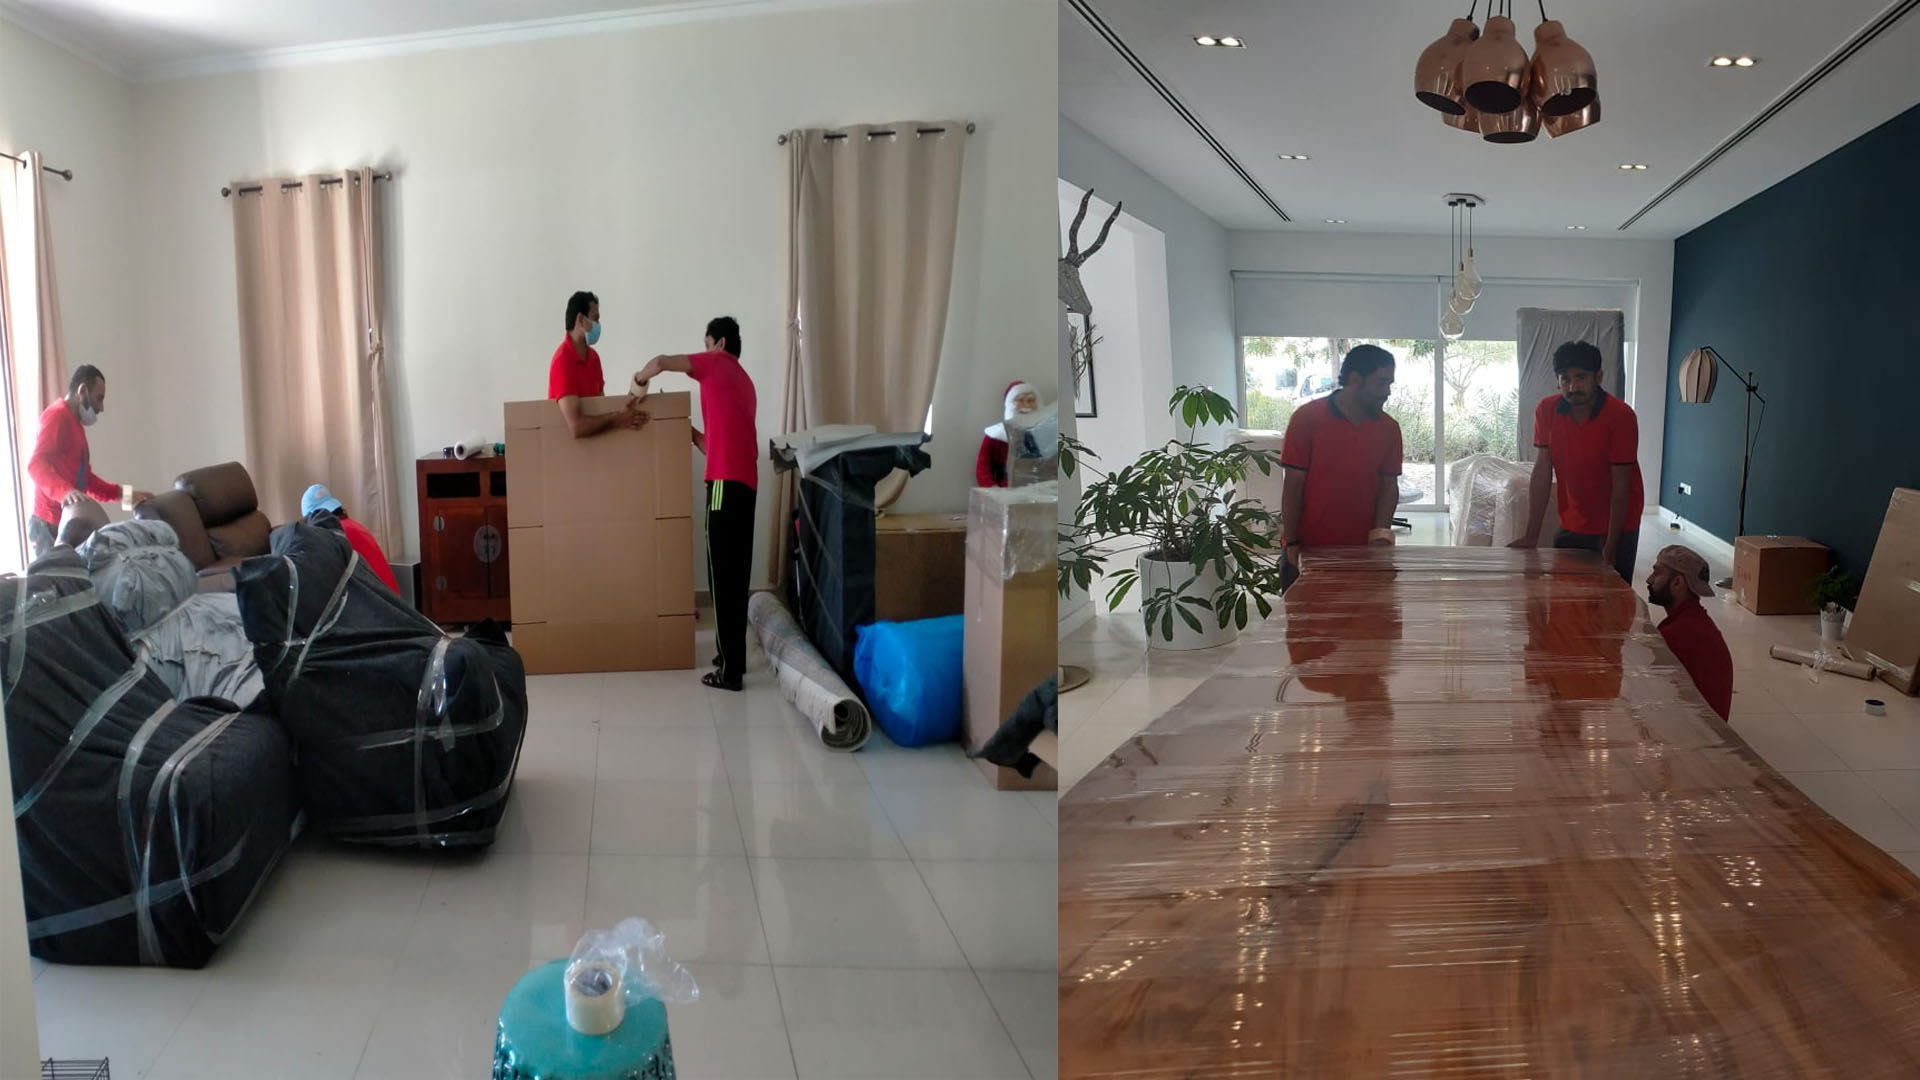 Office Movers and Packers in Dubai, Movers and Packers in Dubai